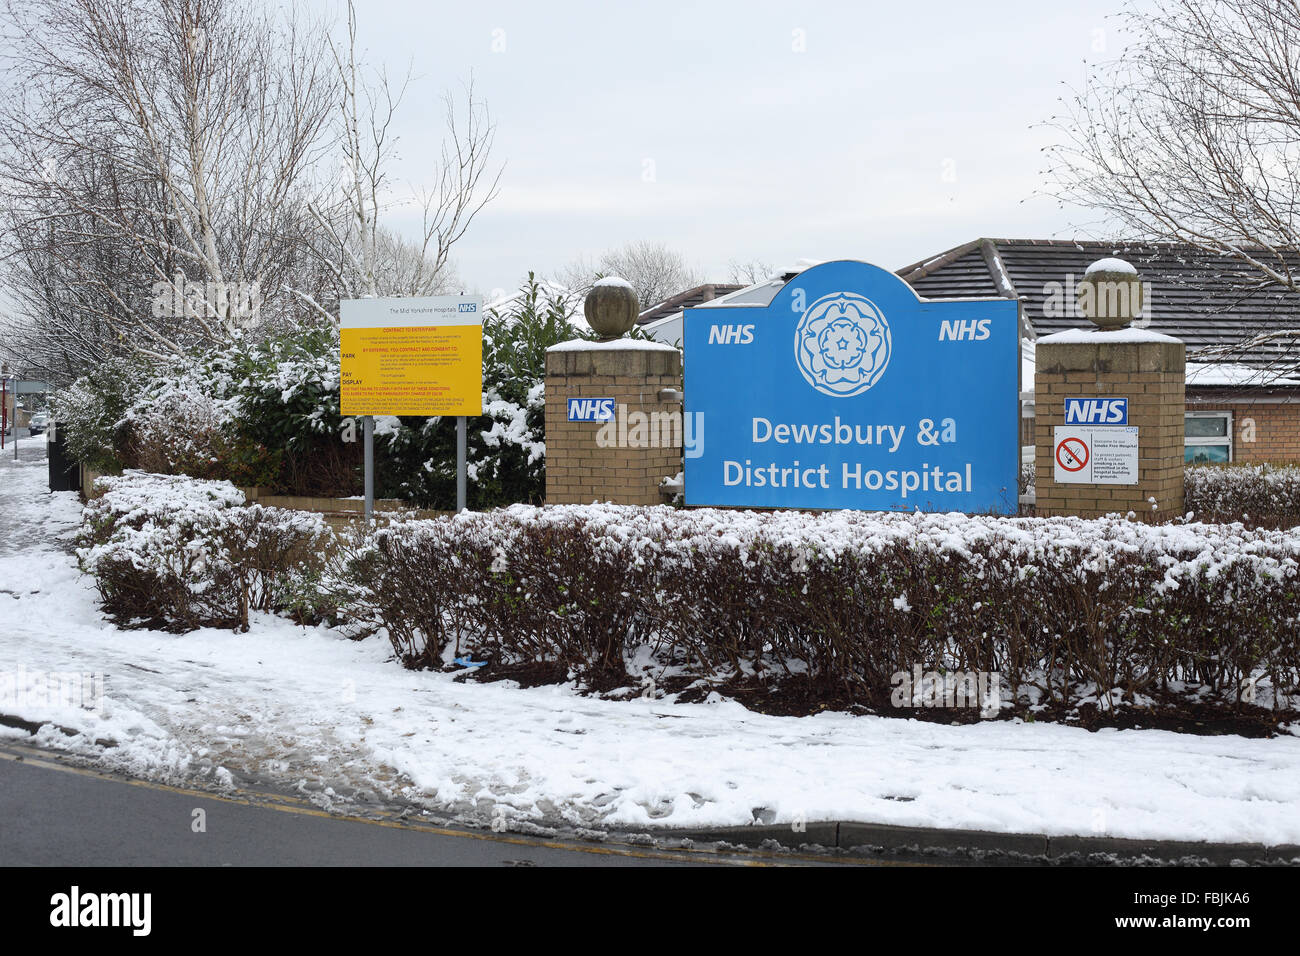 Dewsbury and district hospital sign Stock Photo